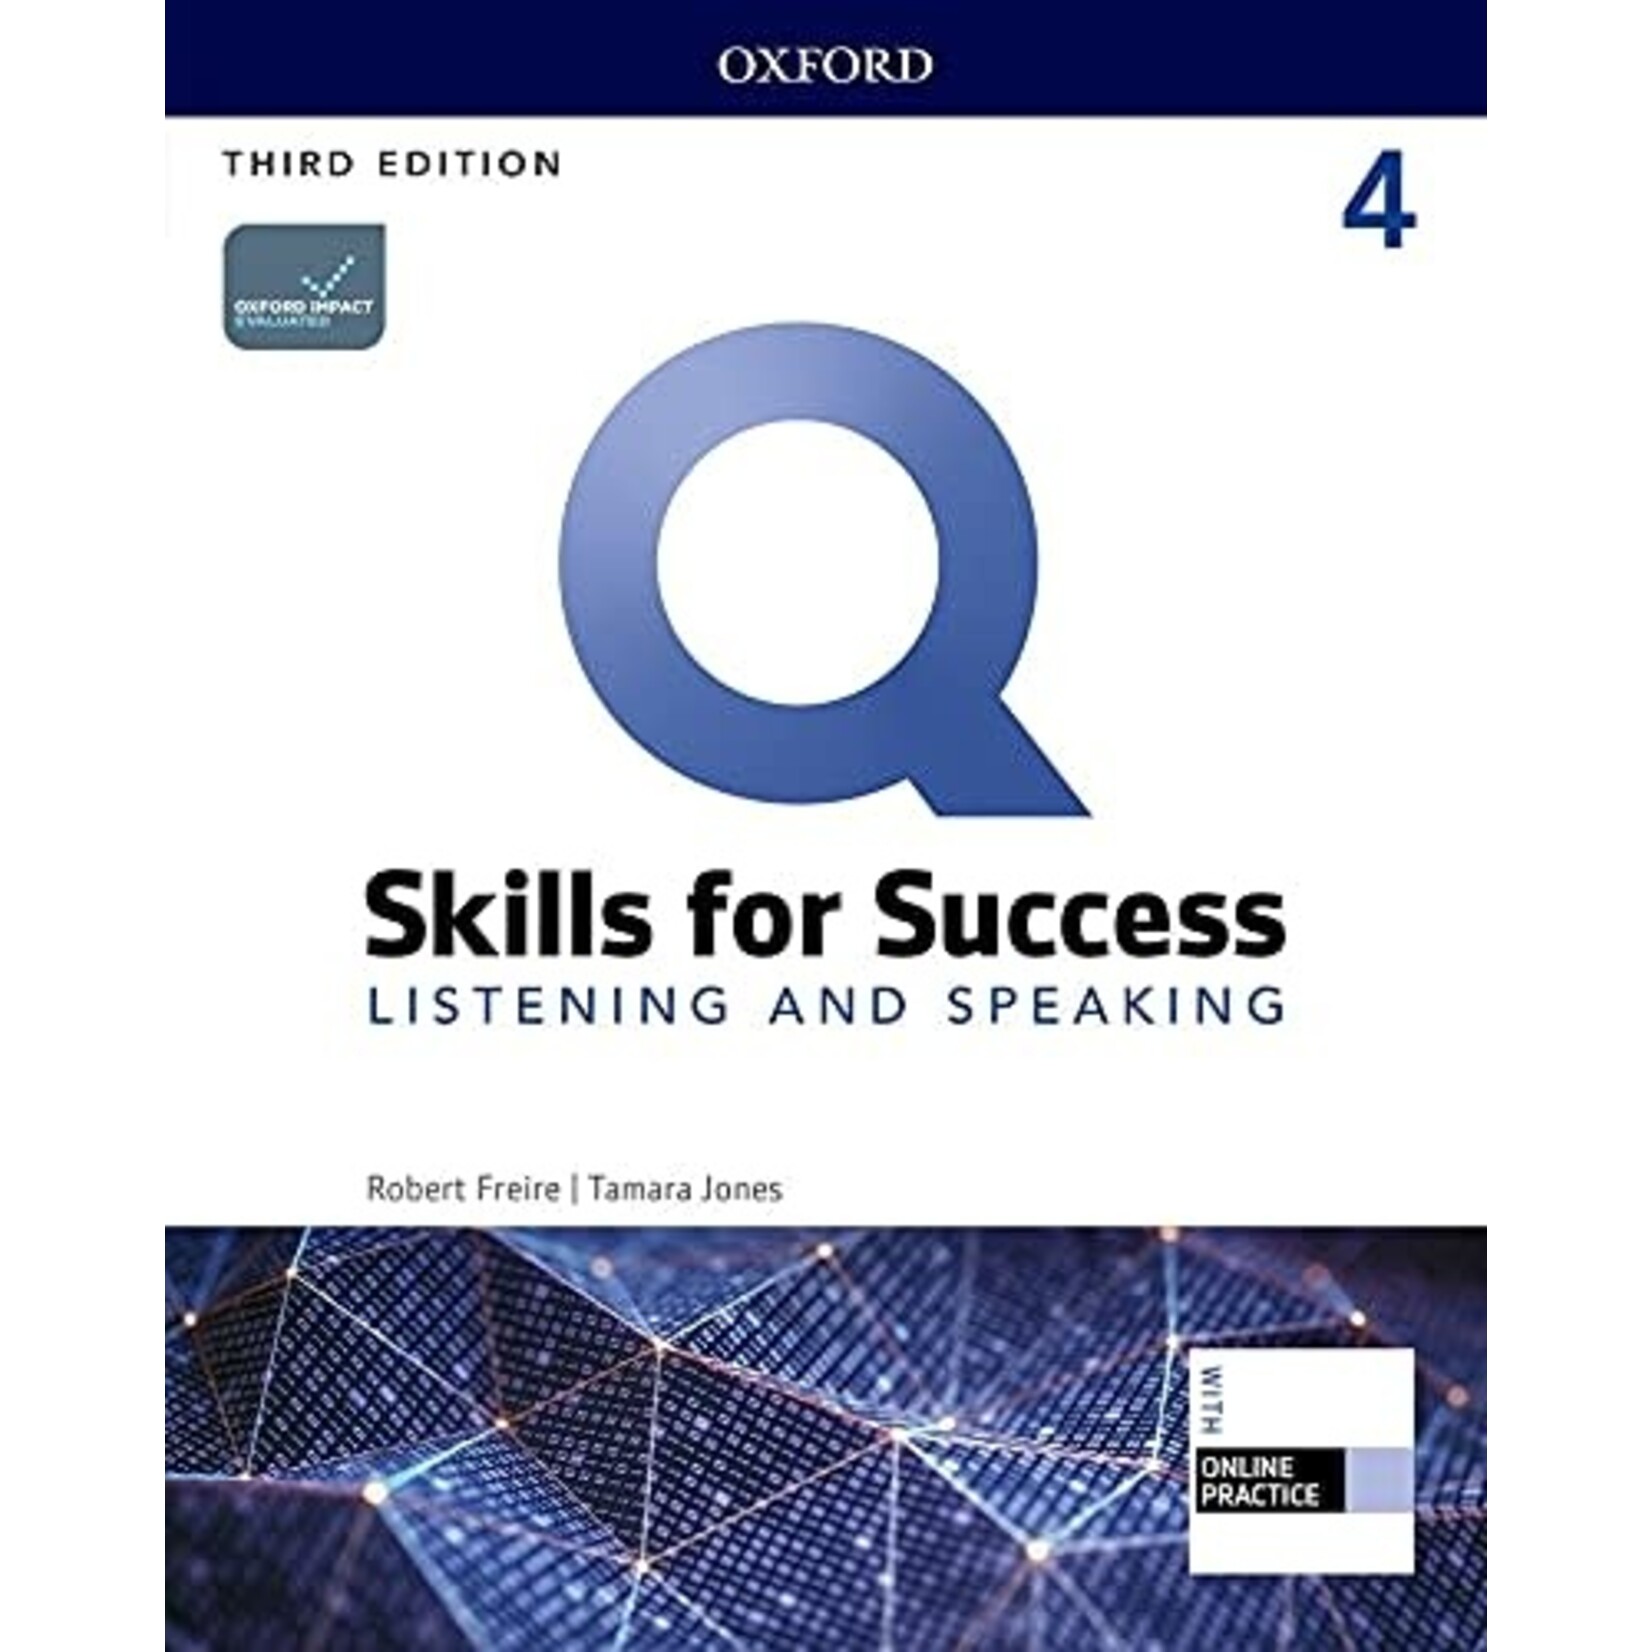 Q Skills for Success 4: Listening and Speaking Student Book with iqonline practice